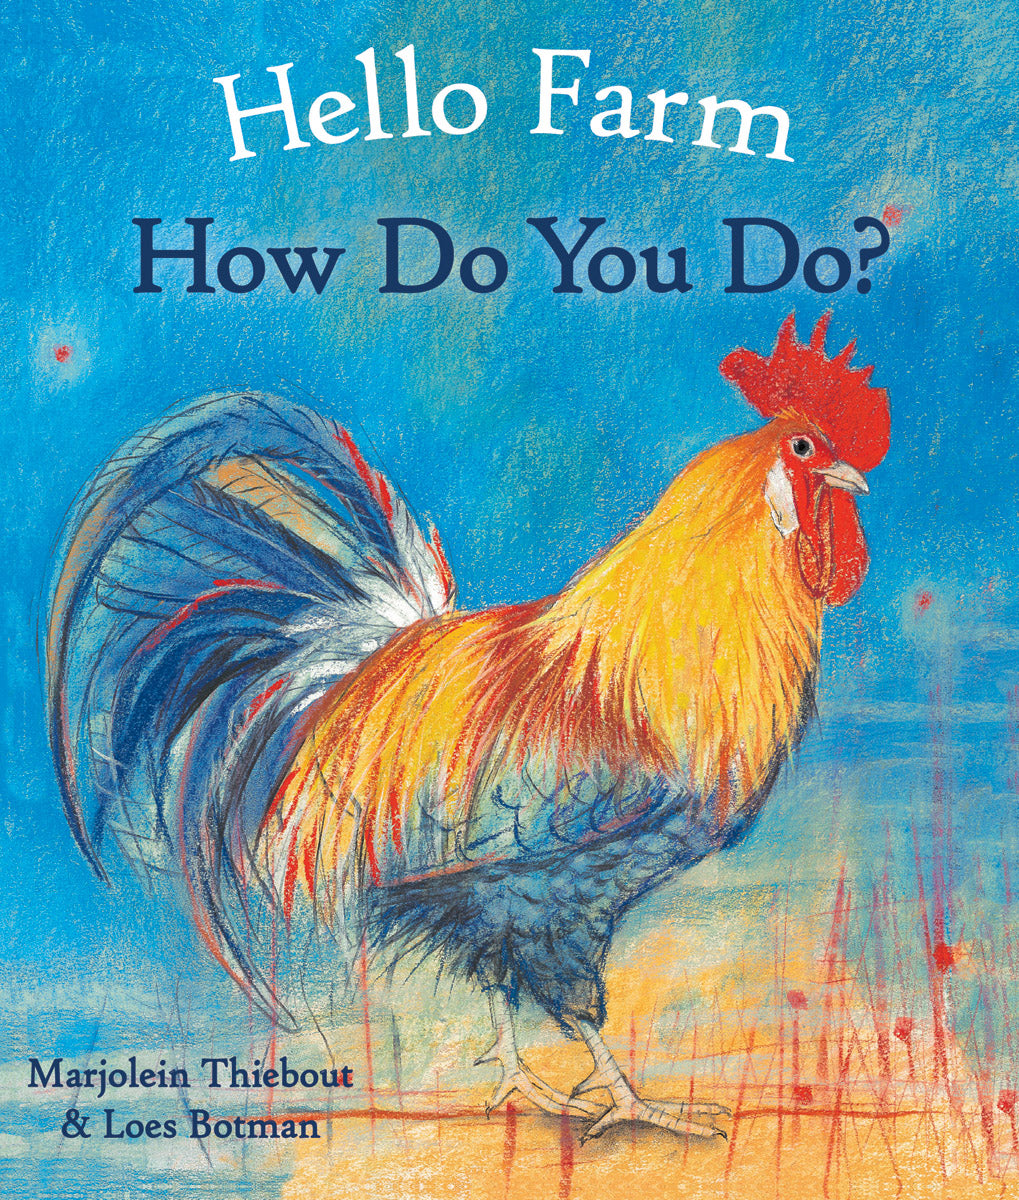 Hello Farm, How Do You Do? by Marjolein Thiebout, Illustrated by Loes Botman